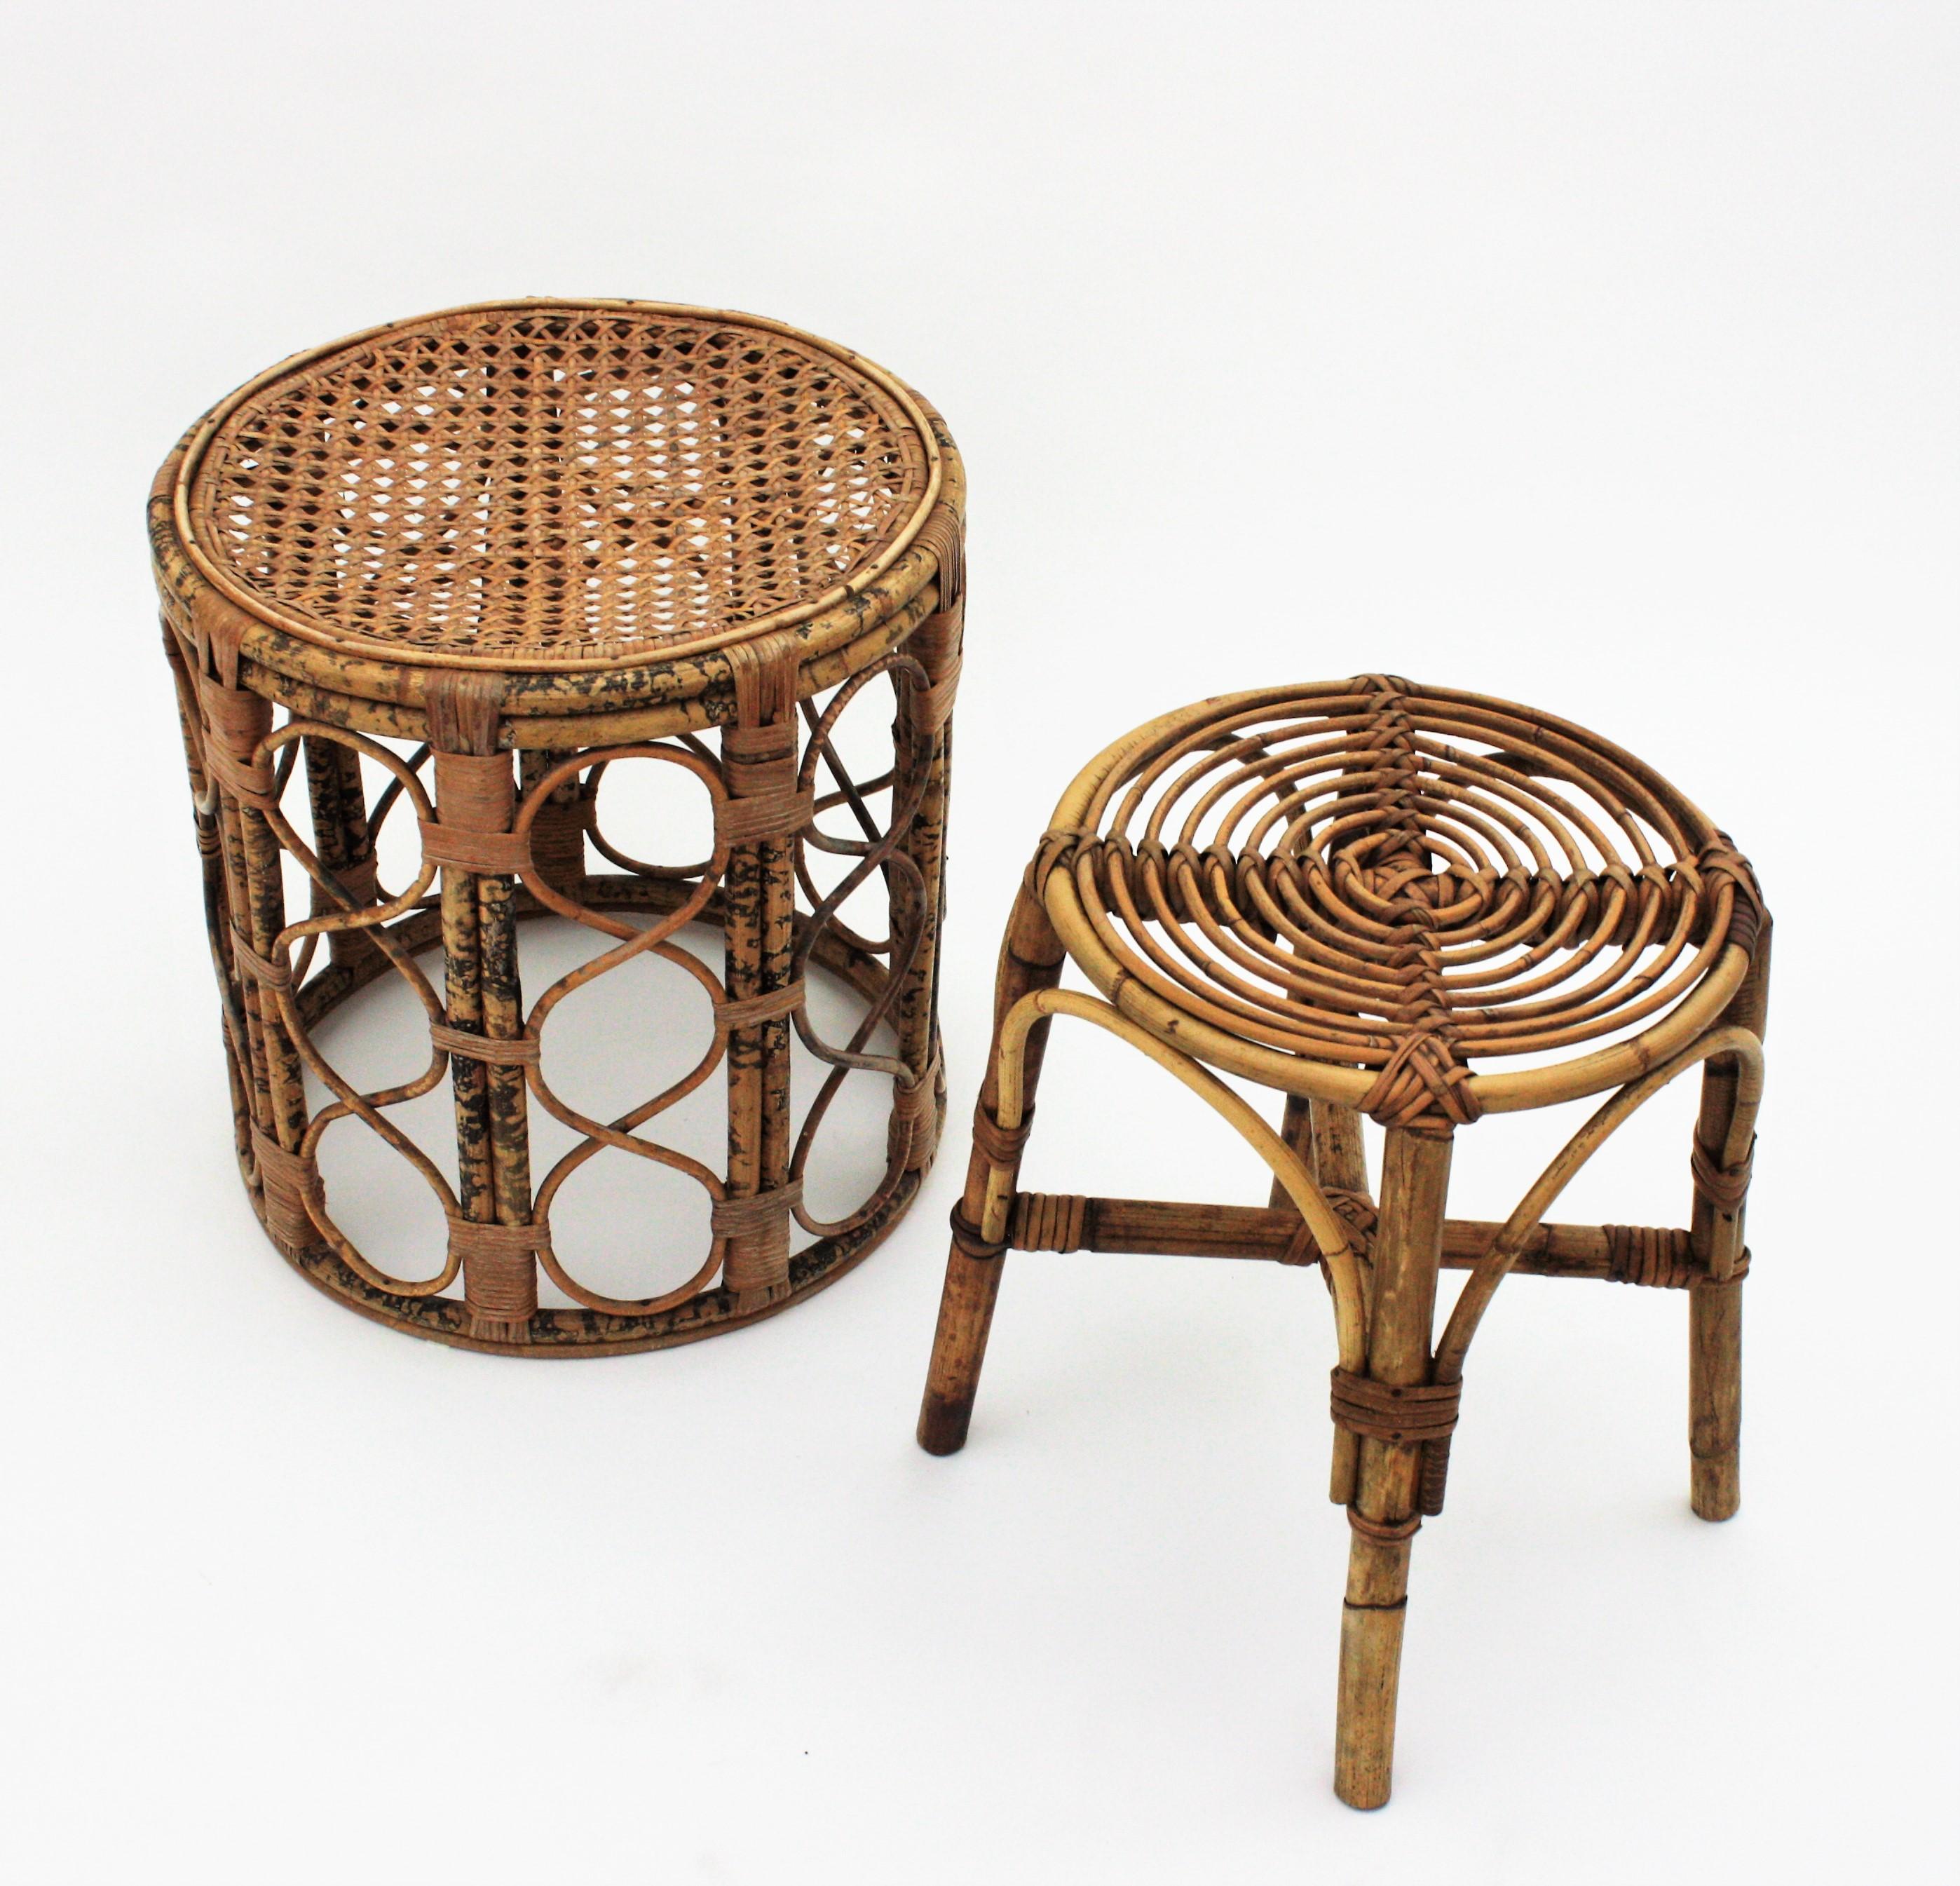 French Side Table or Stool in Tiger Bamboo Rattan with Woven Wicker Top, 1940s For Sale 3